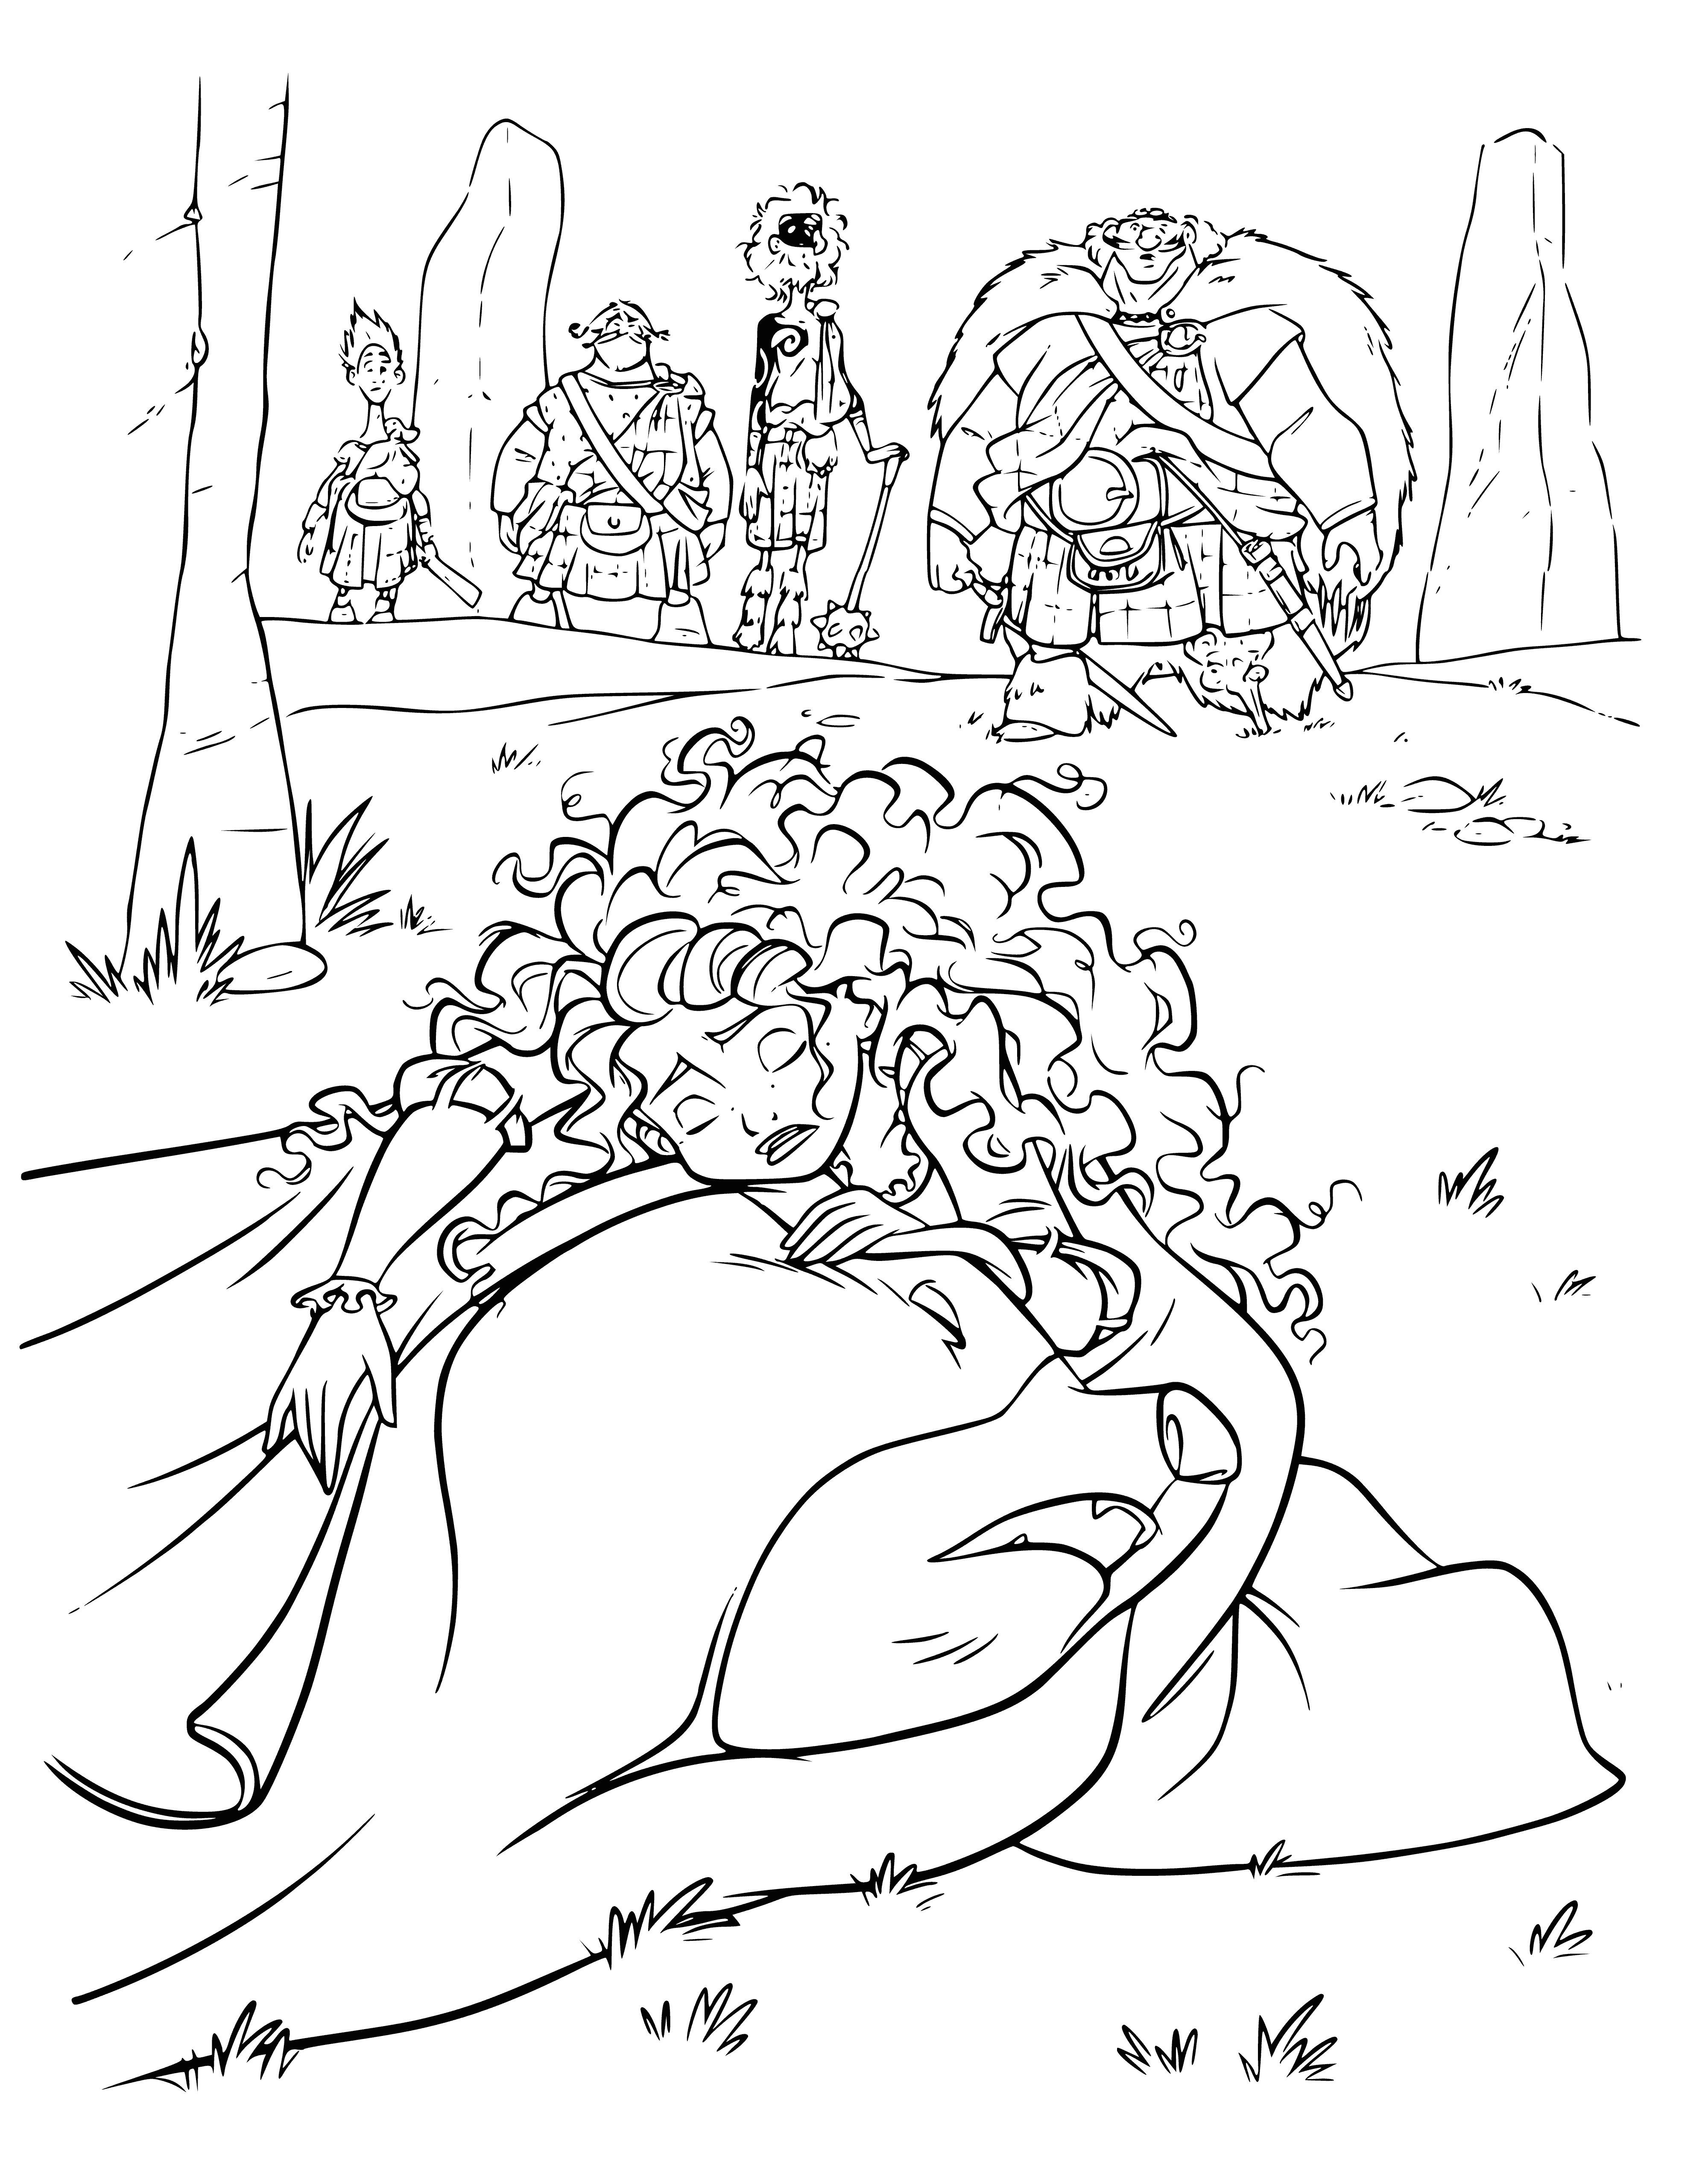 Merida covers the bear with a tapestry coloring page